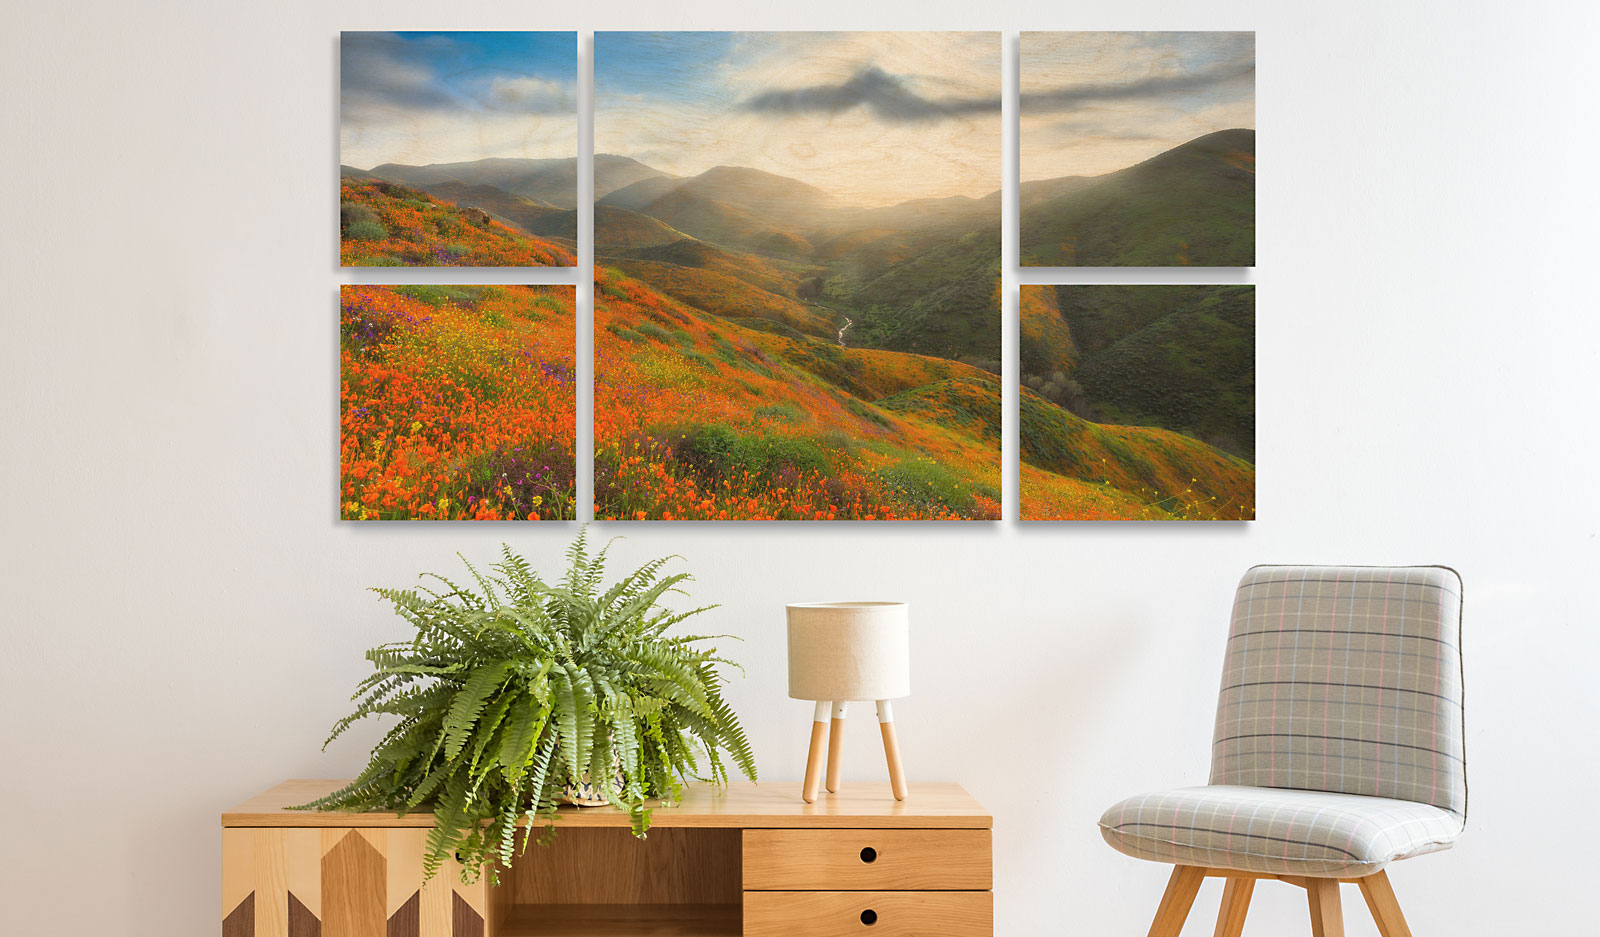 Wall Clusters & Splits - Wall Displays Featuring Your Images on Maple Wood Prints